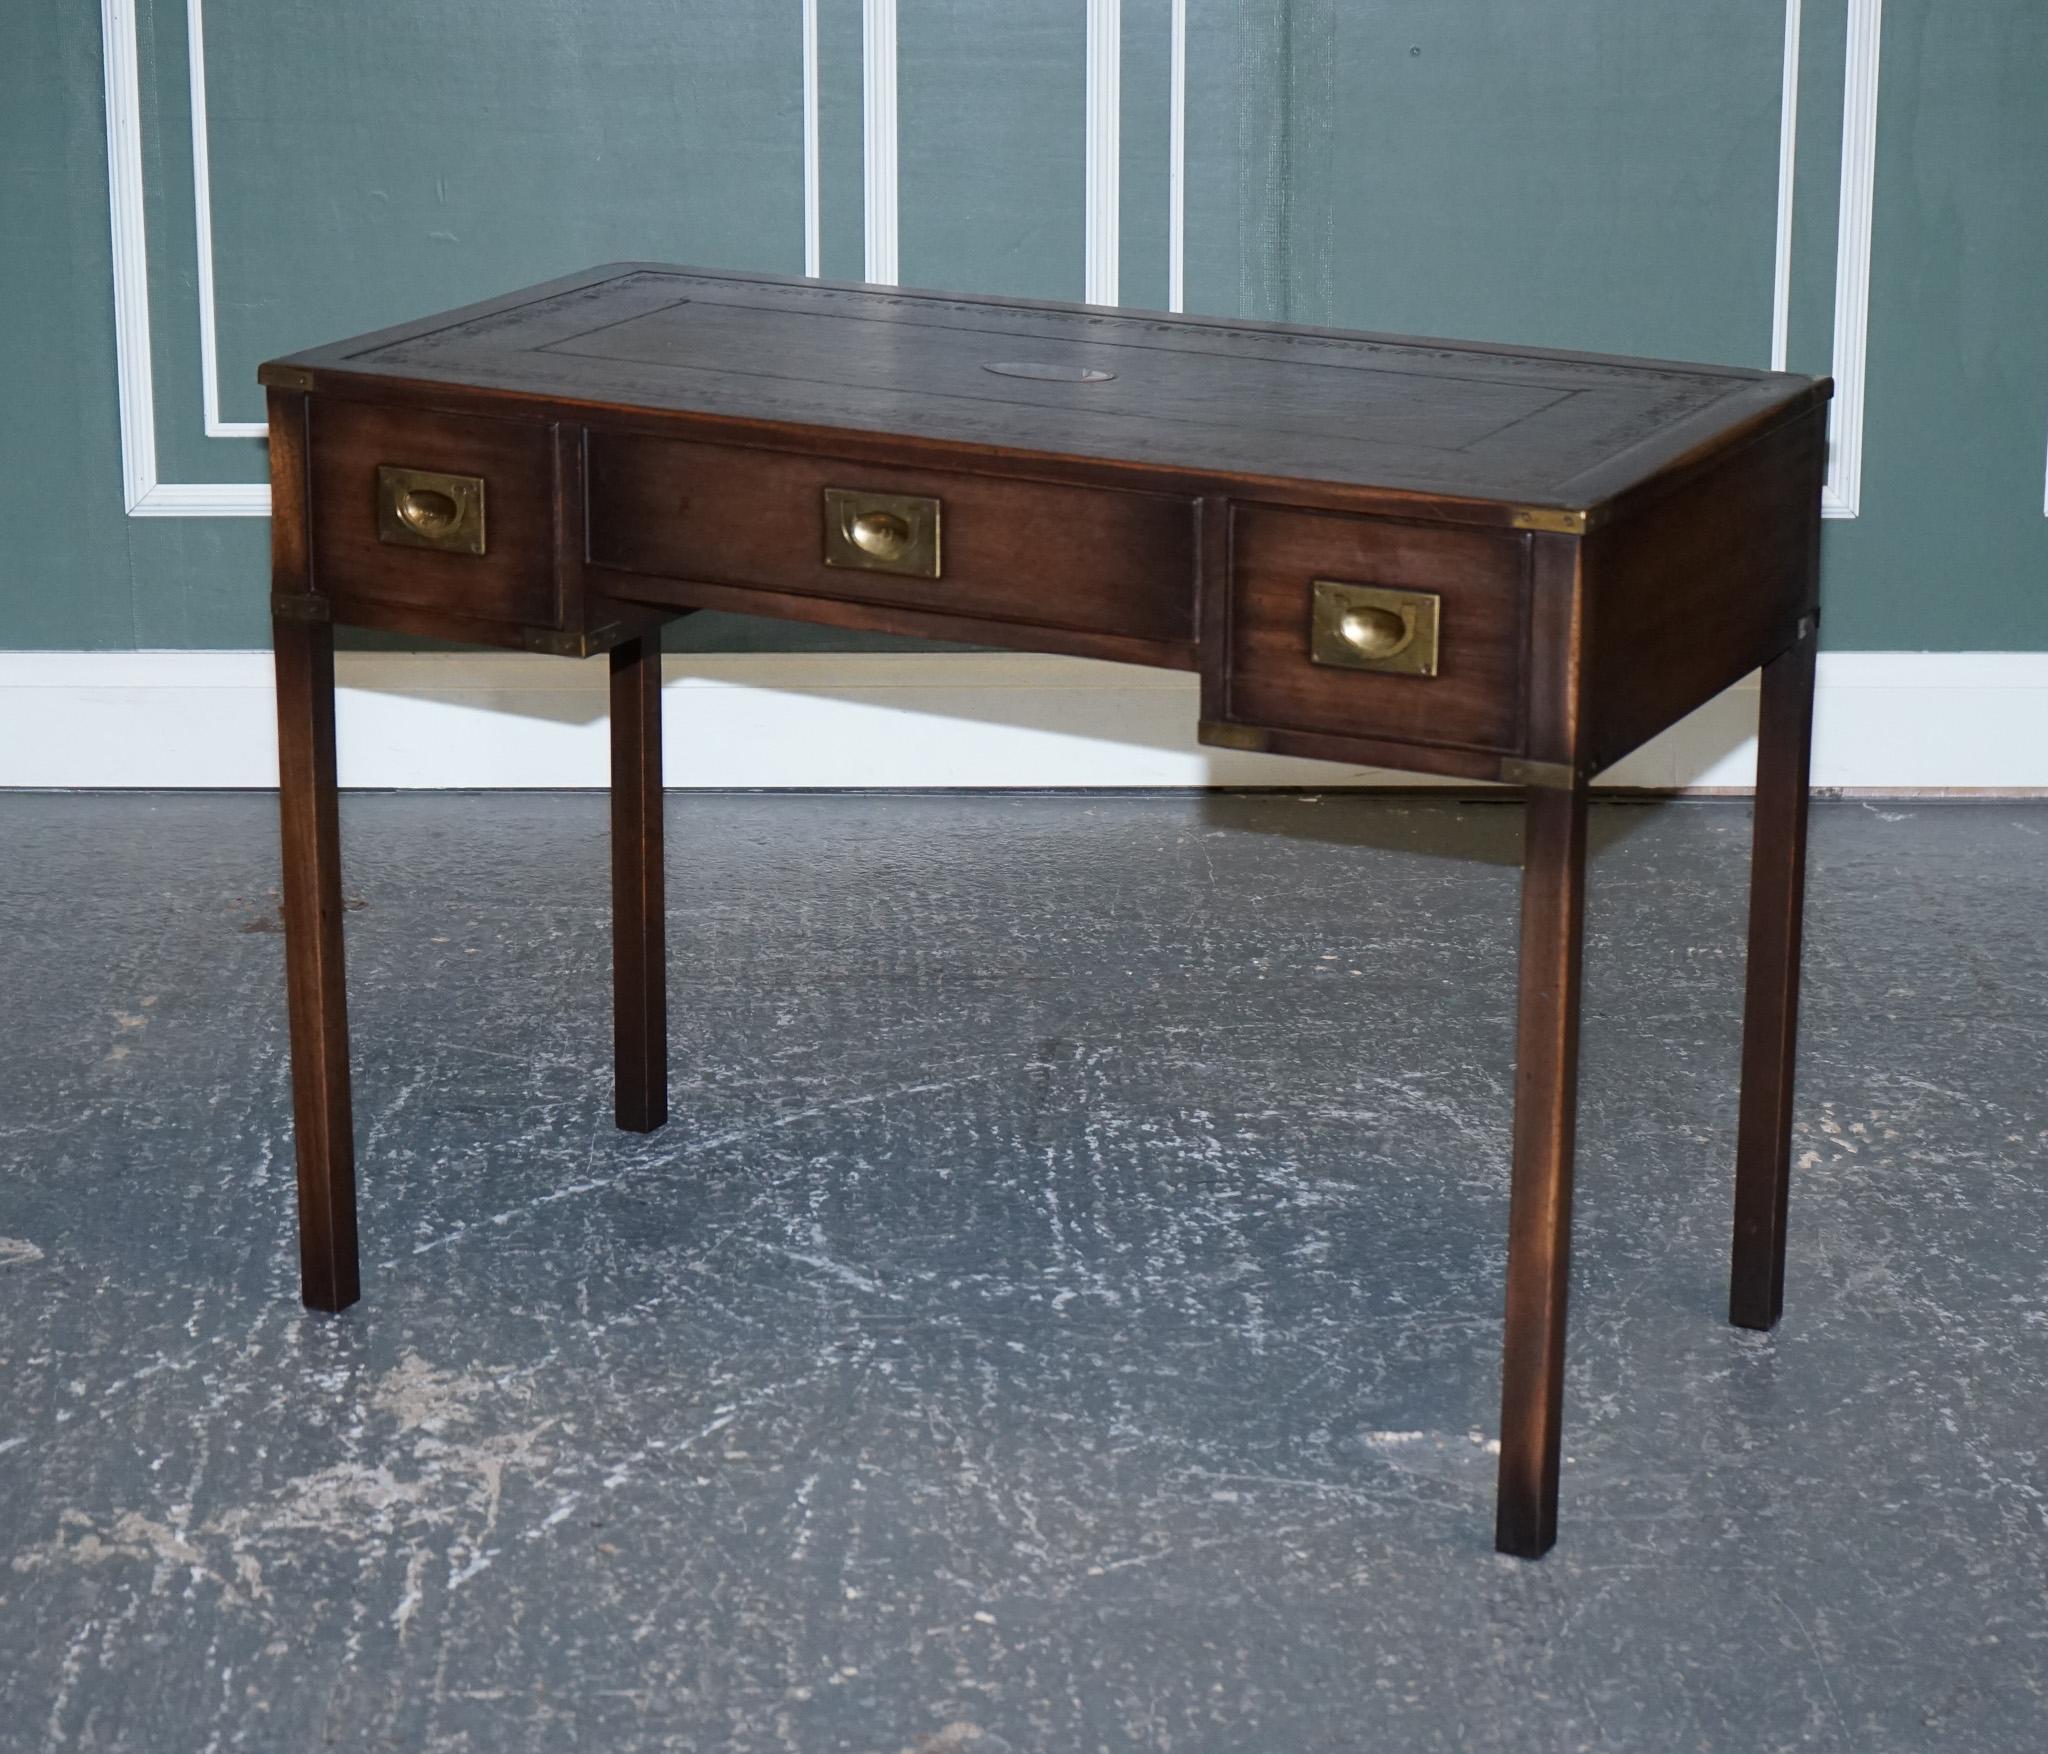 We are delighted to offer for sale this Harrods London REH Kennedy military campaign writing table.

The desk is a very good seize, ideal fro compact spaced whilst still maximising the use of the surface work area. It has five good sized drawers